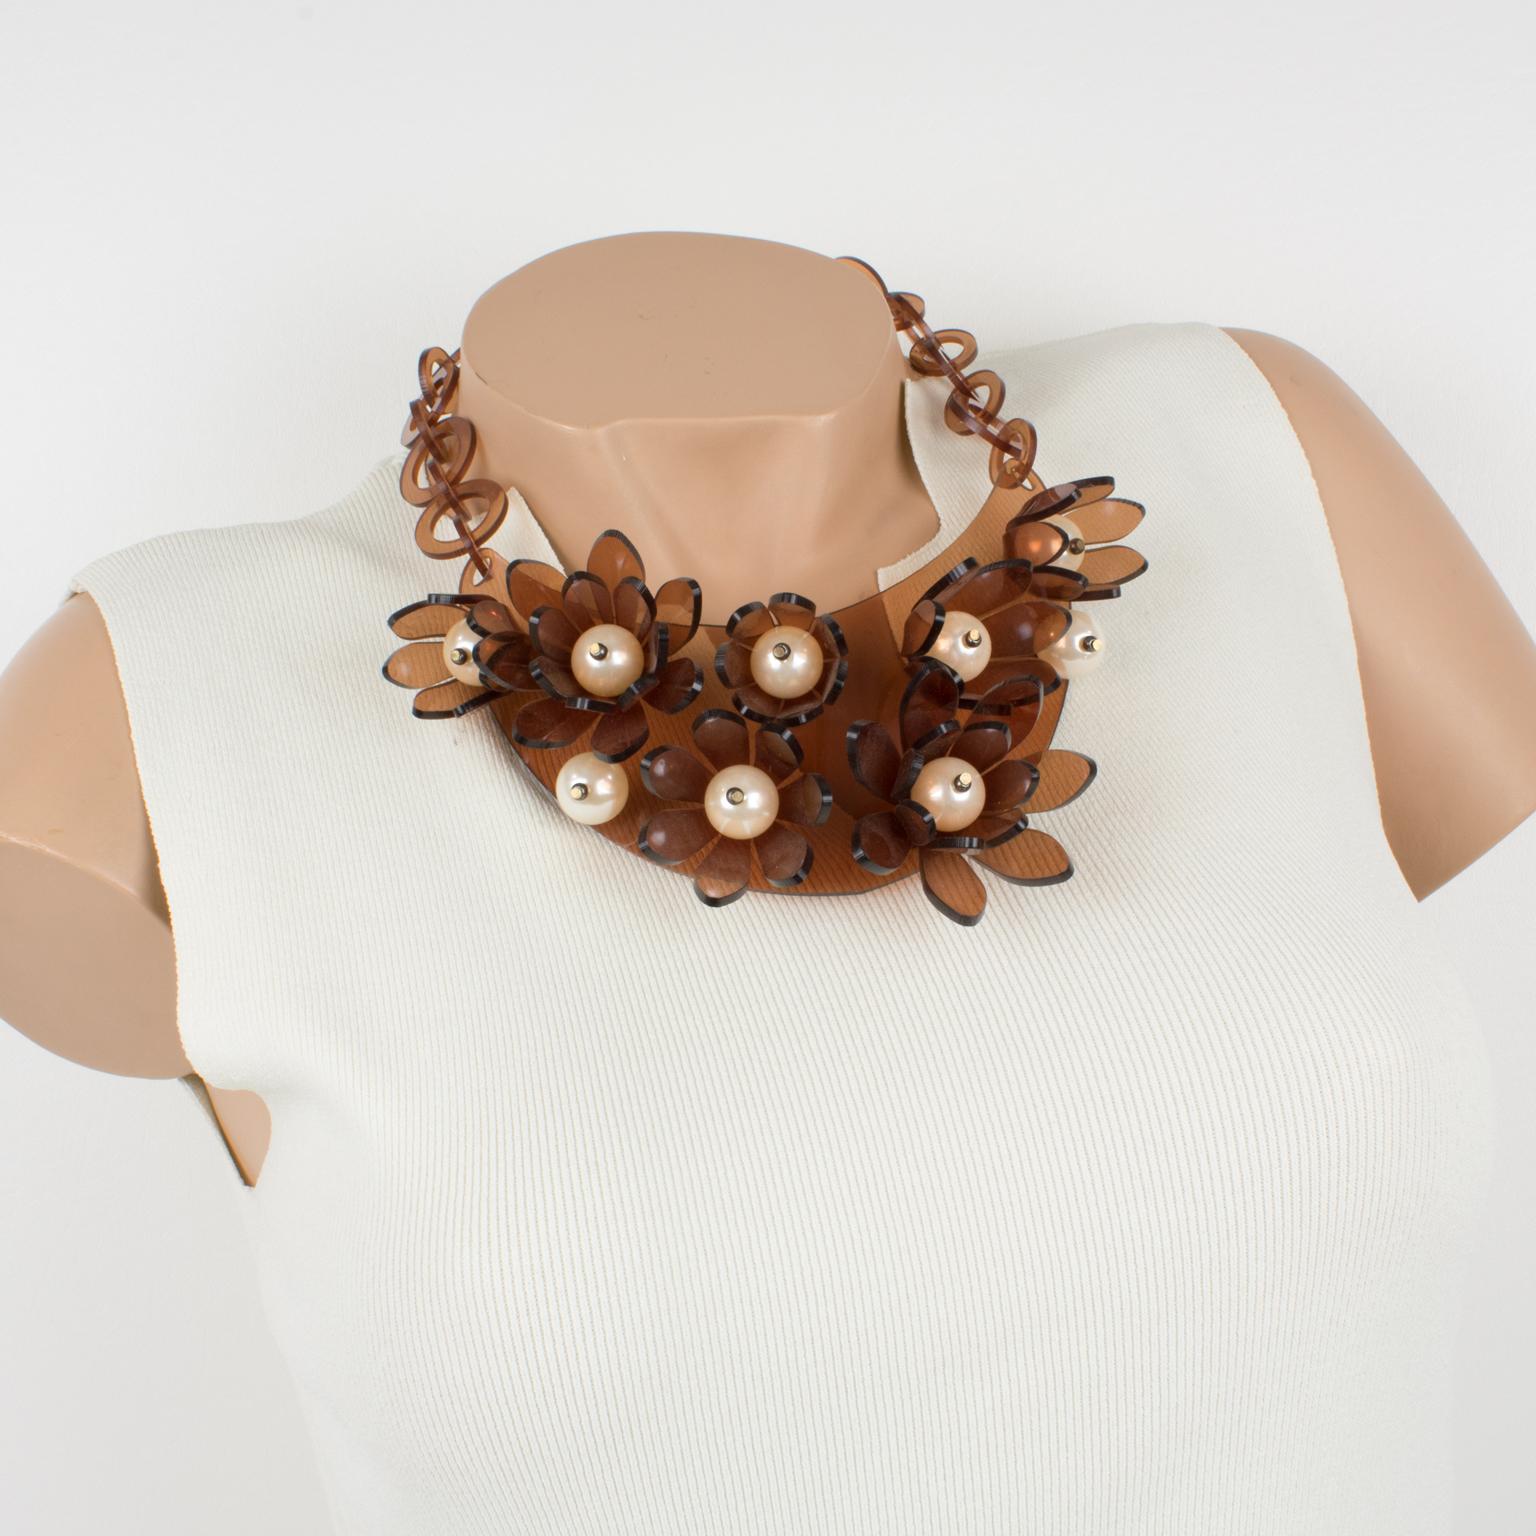 This striking transparent copper Lucite or Plexiglass bib choker necklace was crafted by Italian designer Manoa2 (Milano 1980 - 1985). A collar shape with a large curved bib topped with dimensional flowers and huge pearl-like beads. Note that the